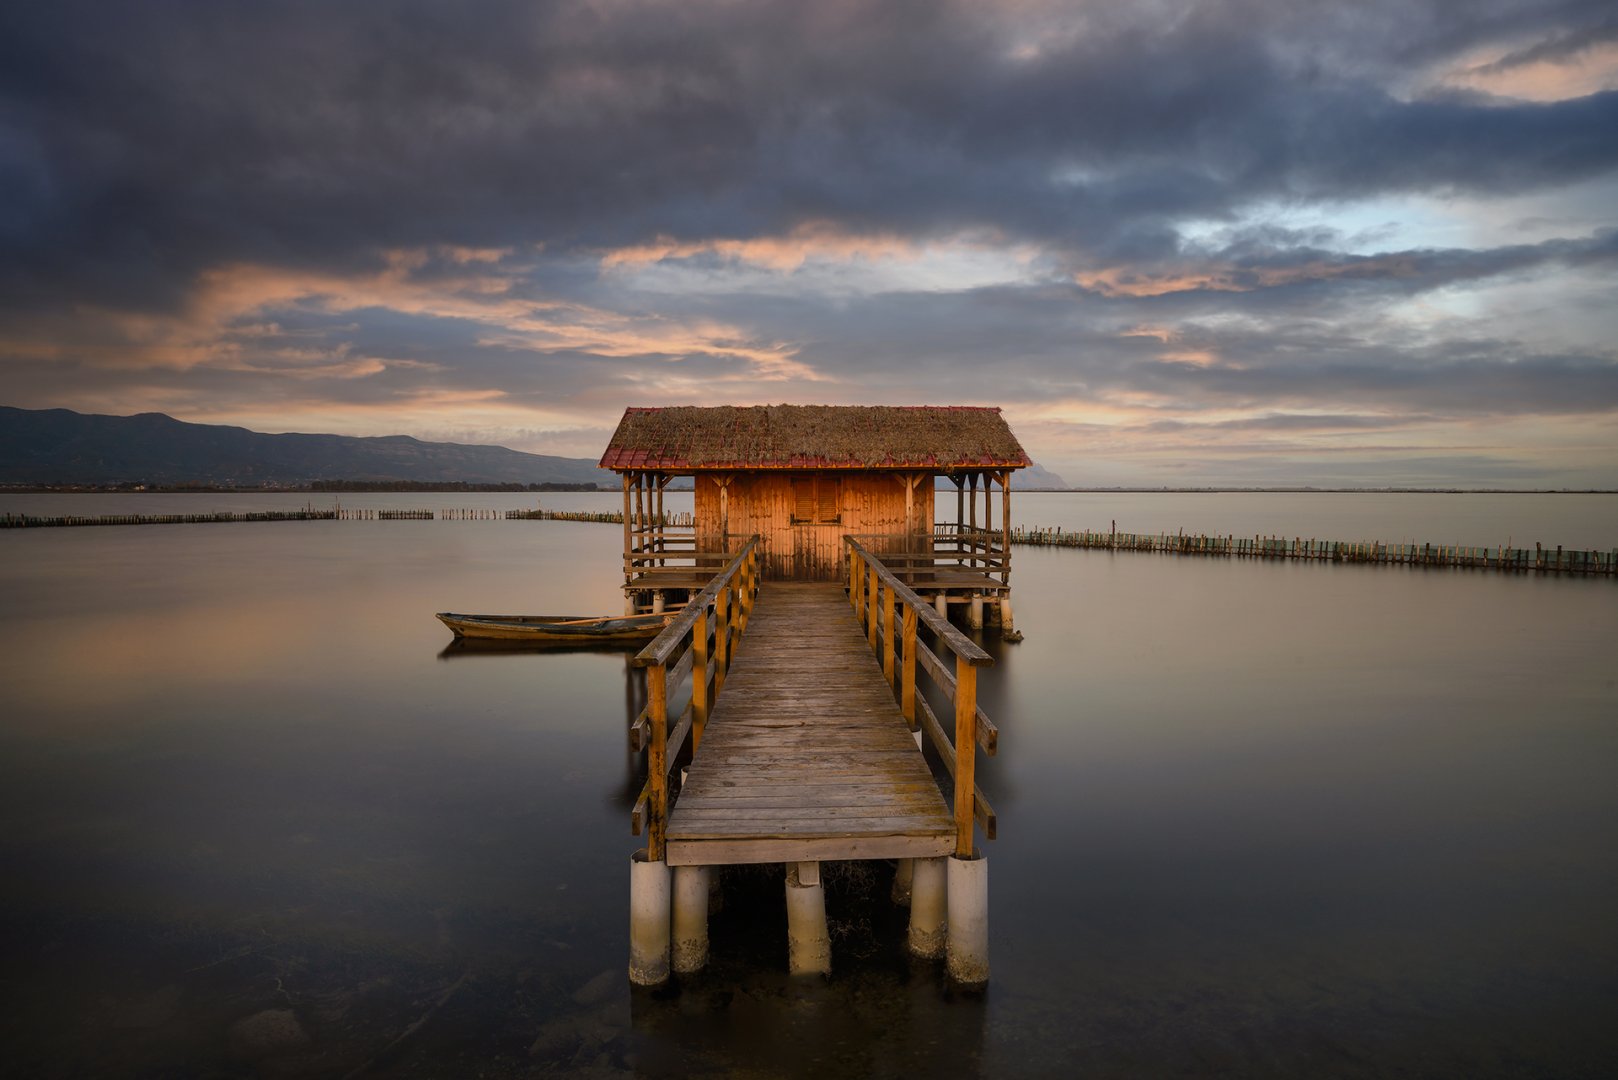 The_Lonely_Hut_in_the_Lake_2022_Edit_DSC3735.jpg